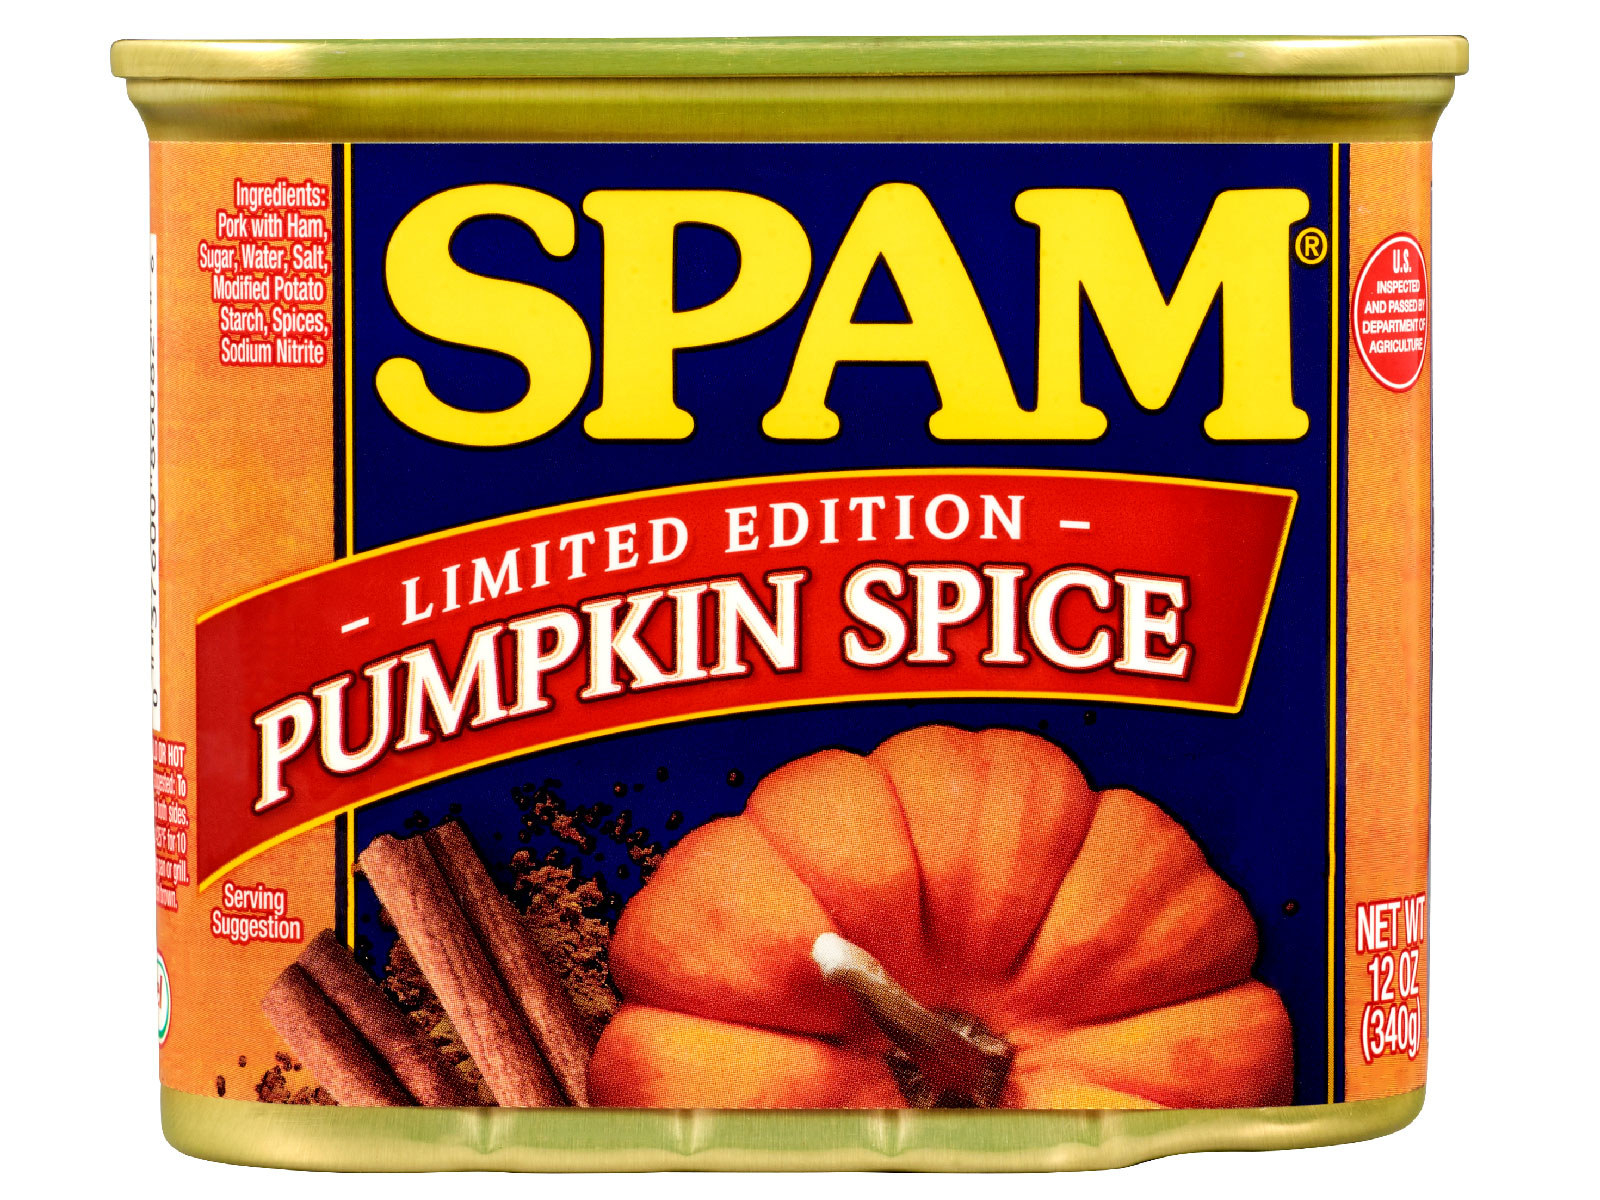 Orange and blue Spam can